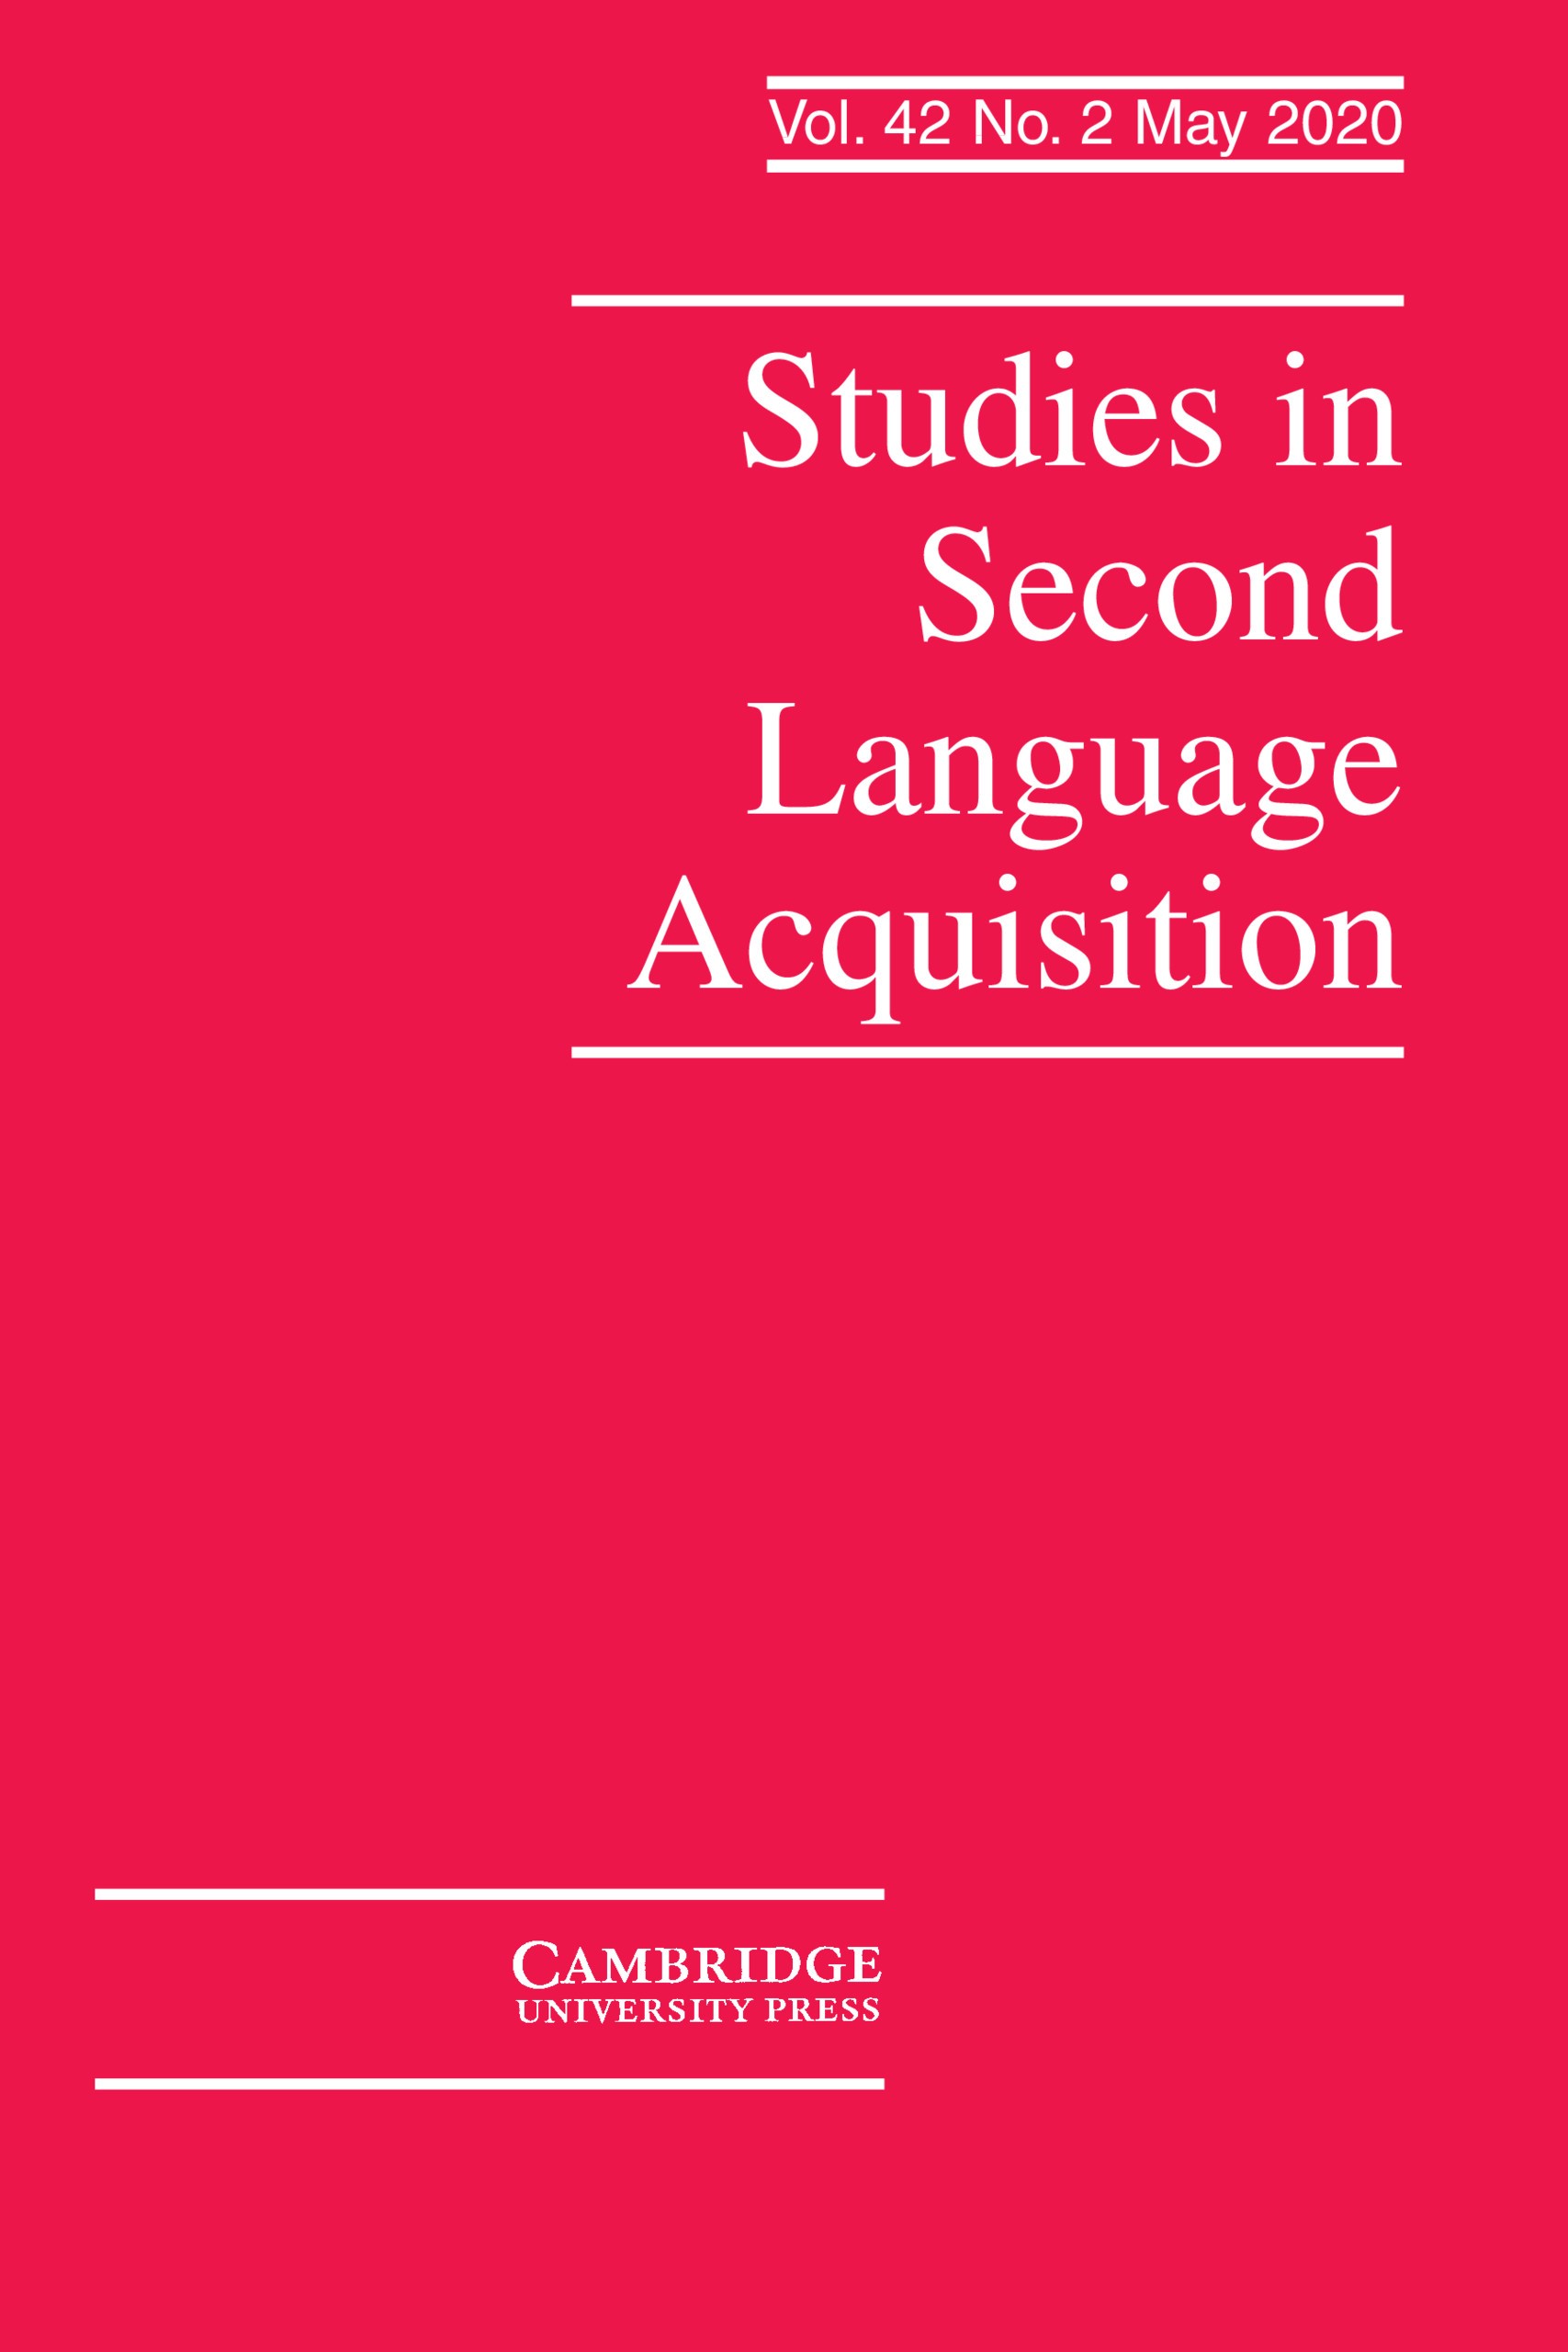 research paper about the language acquisition